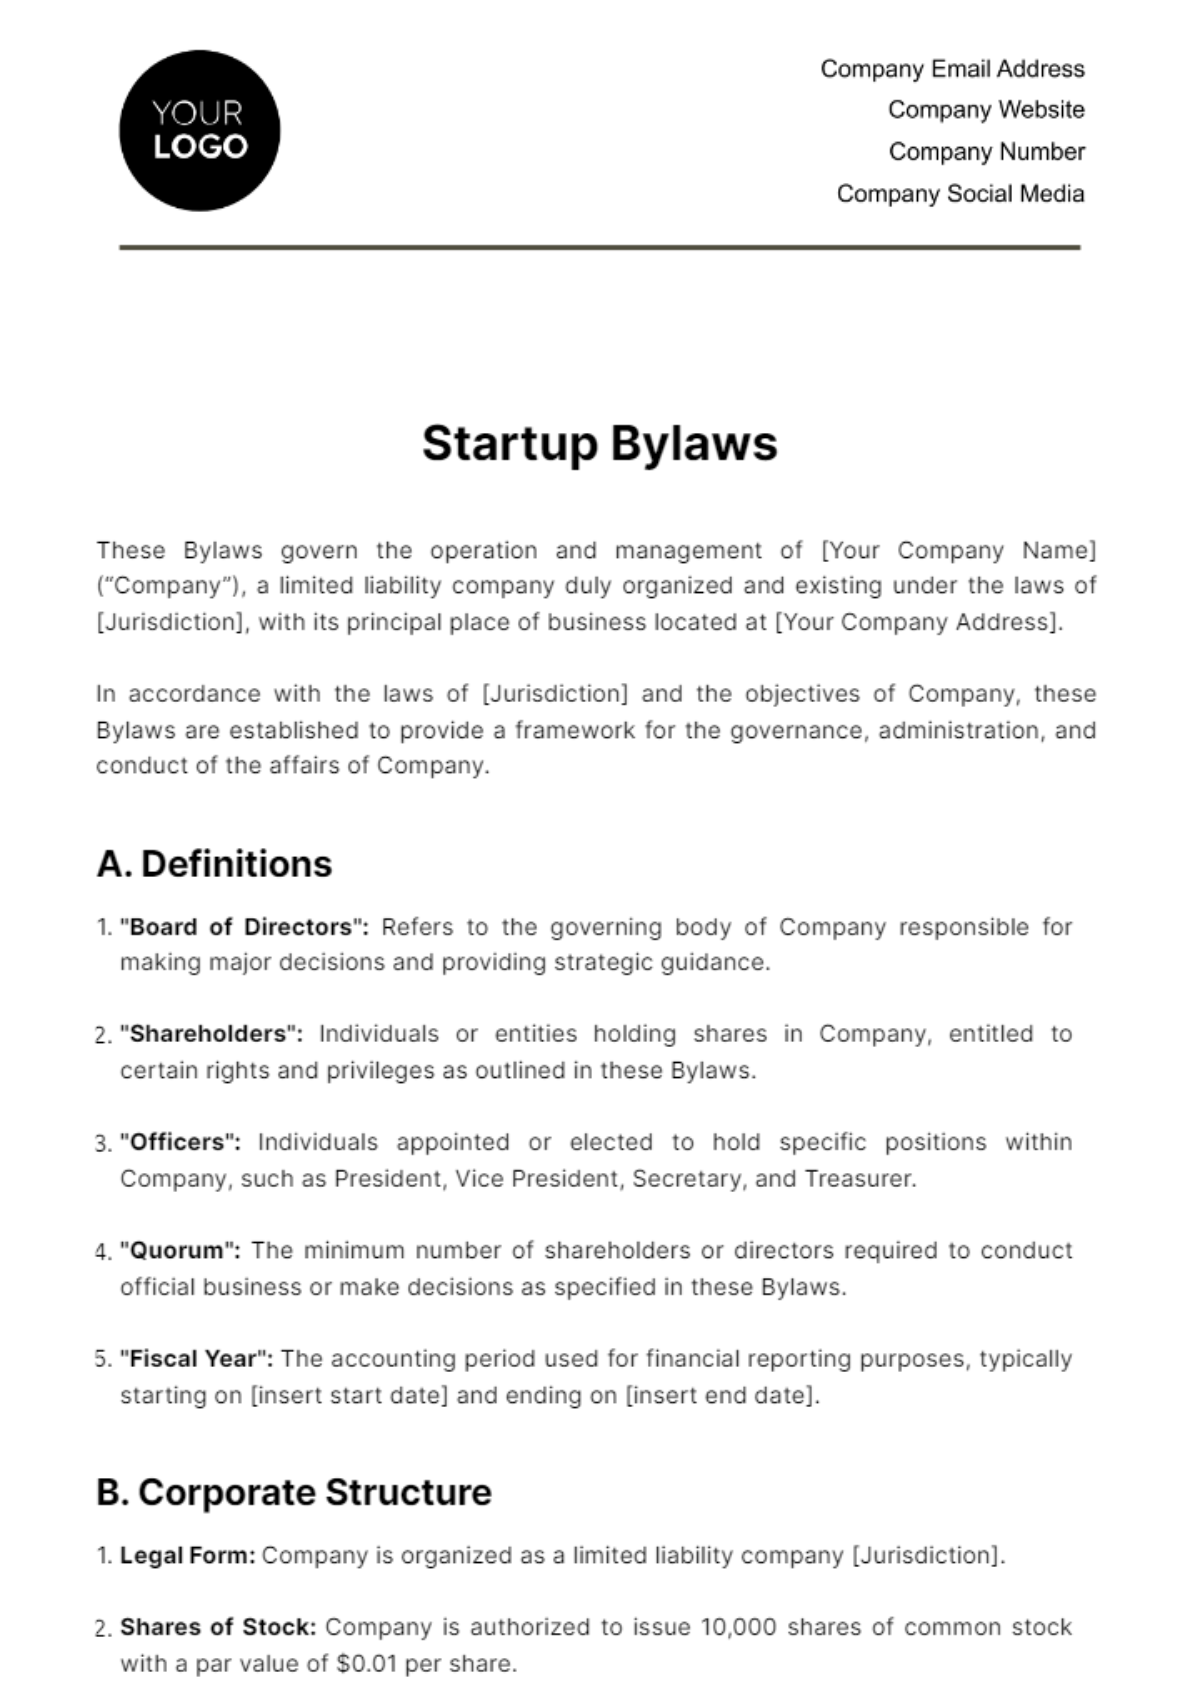 Free Startup Bylaws Template